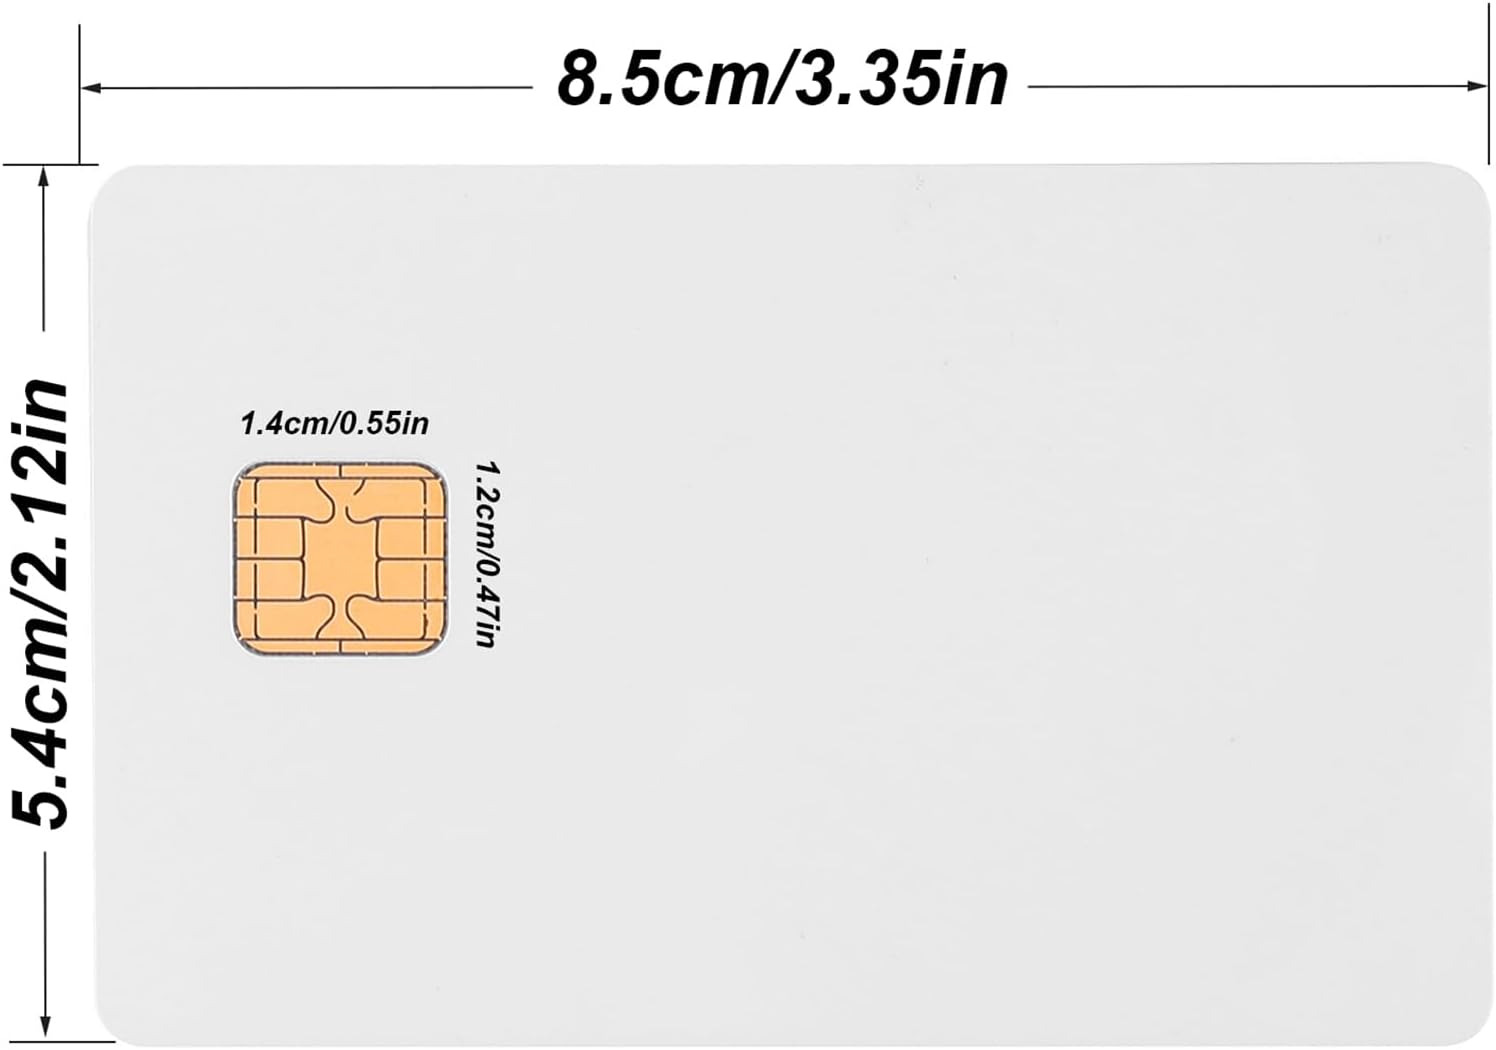 J2A040 Chip Java Jcop Cards Unfused, J2A040 Java Smart Card with 2 Track, 8.4Mm 